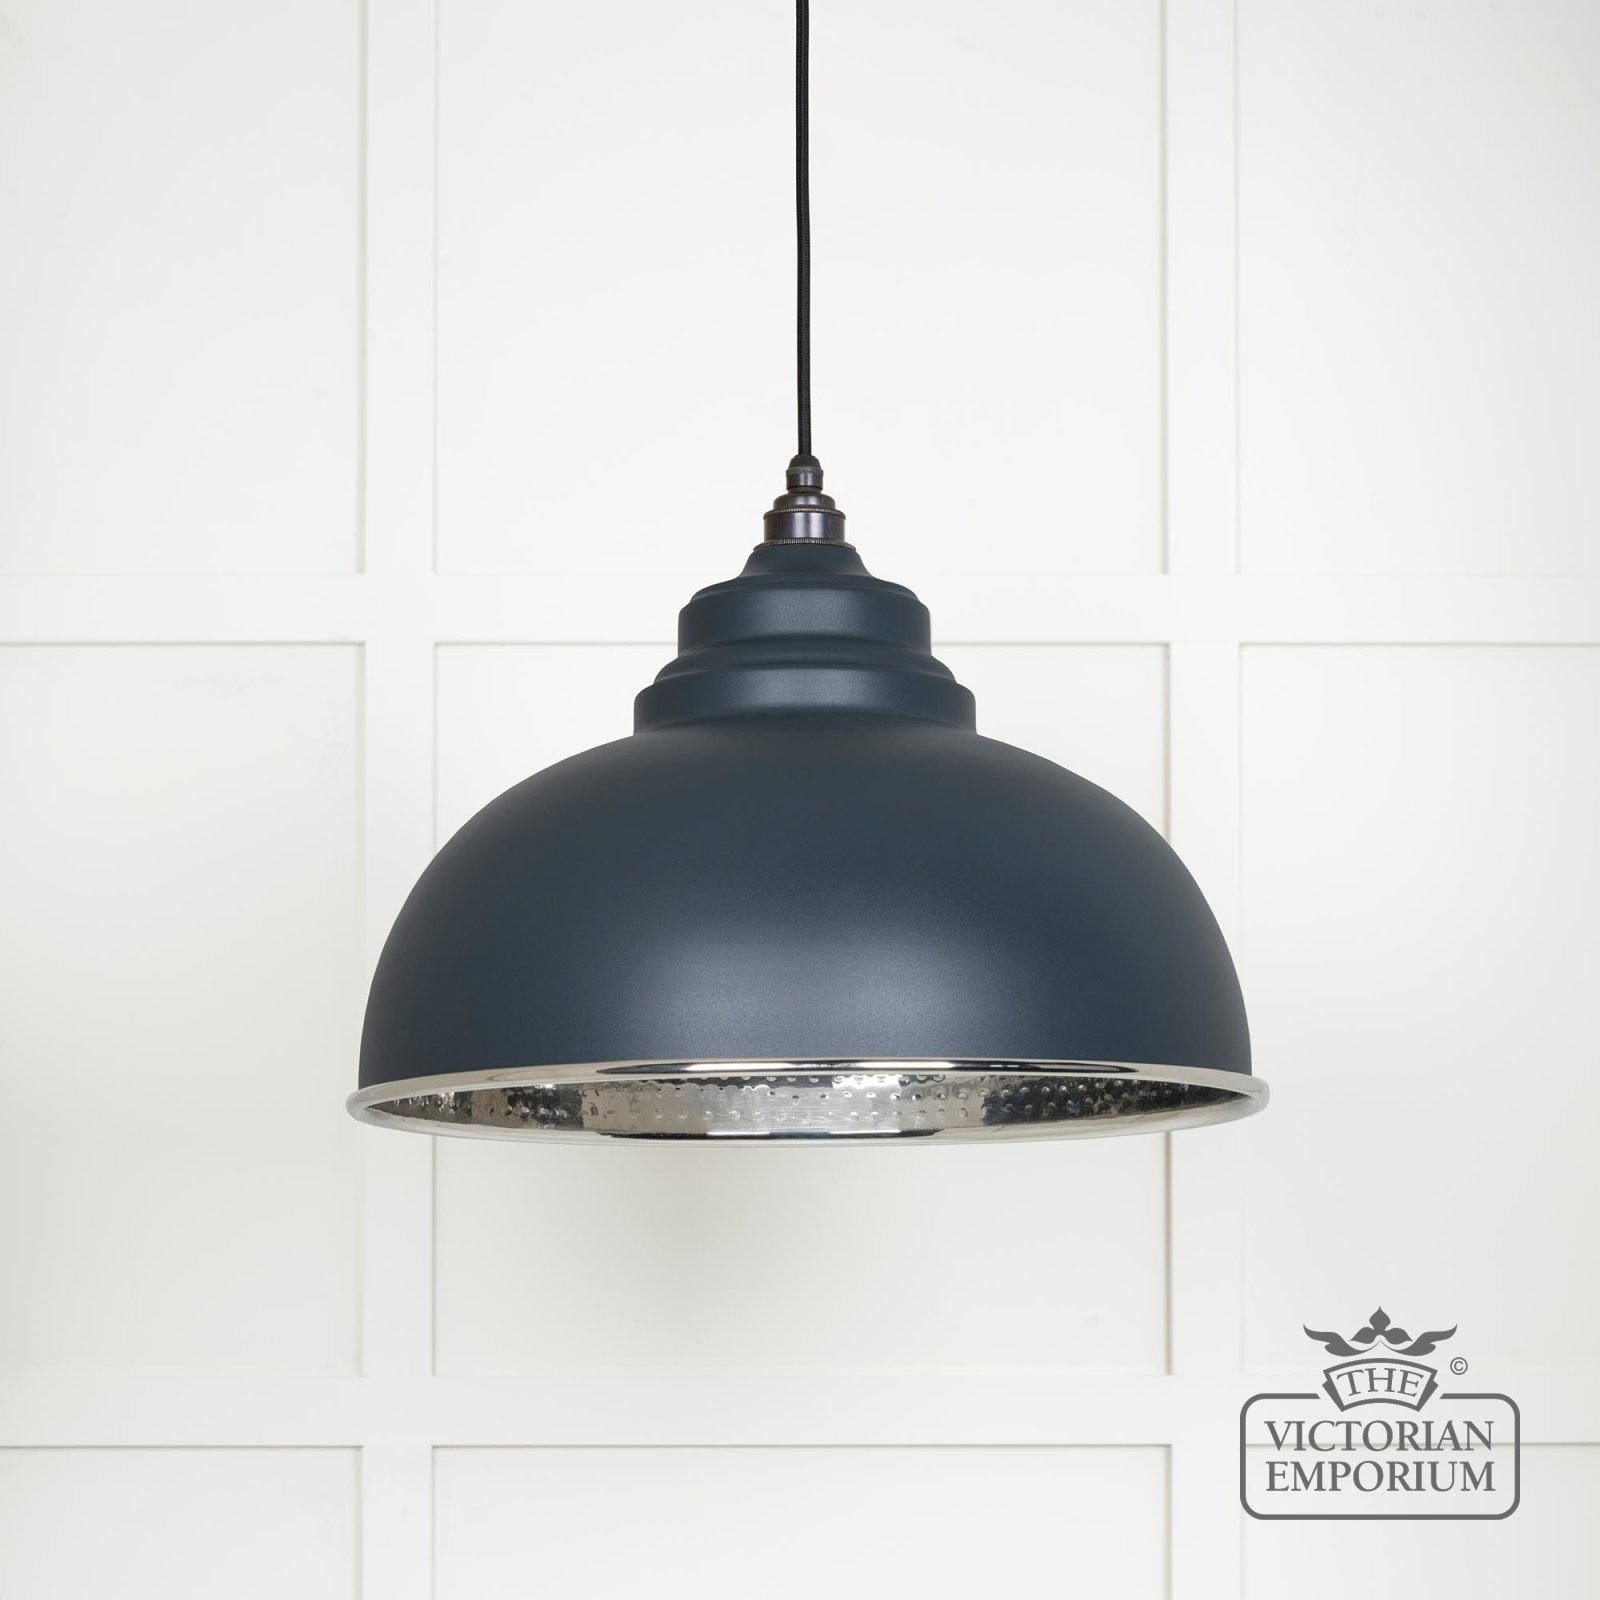 Harlow Pendant light in Hammered Nickel with Soot Exterior